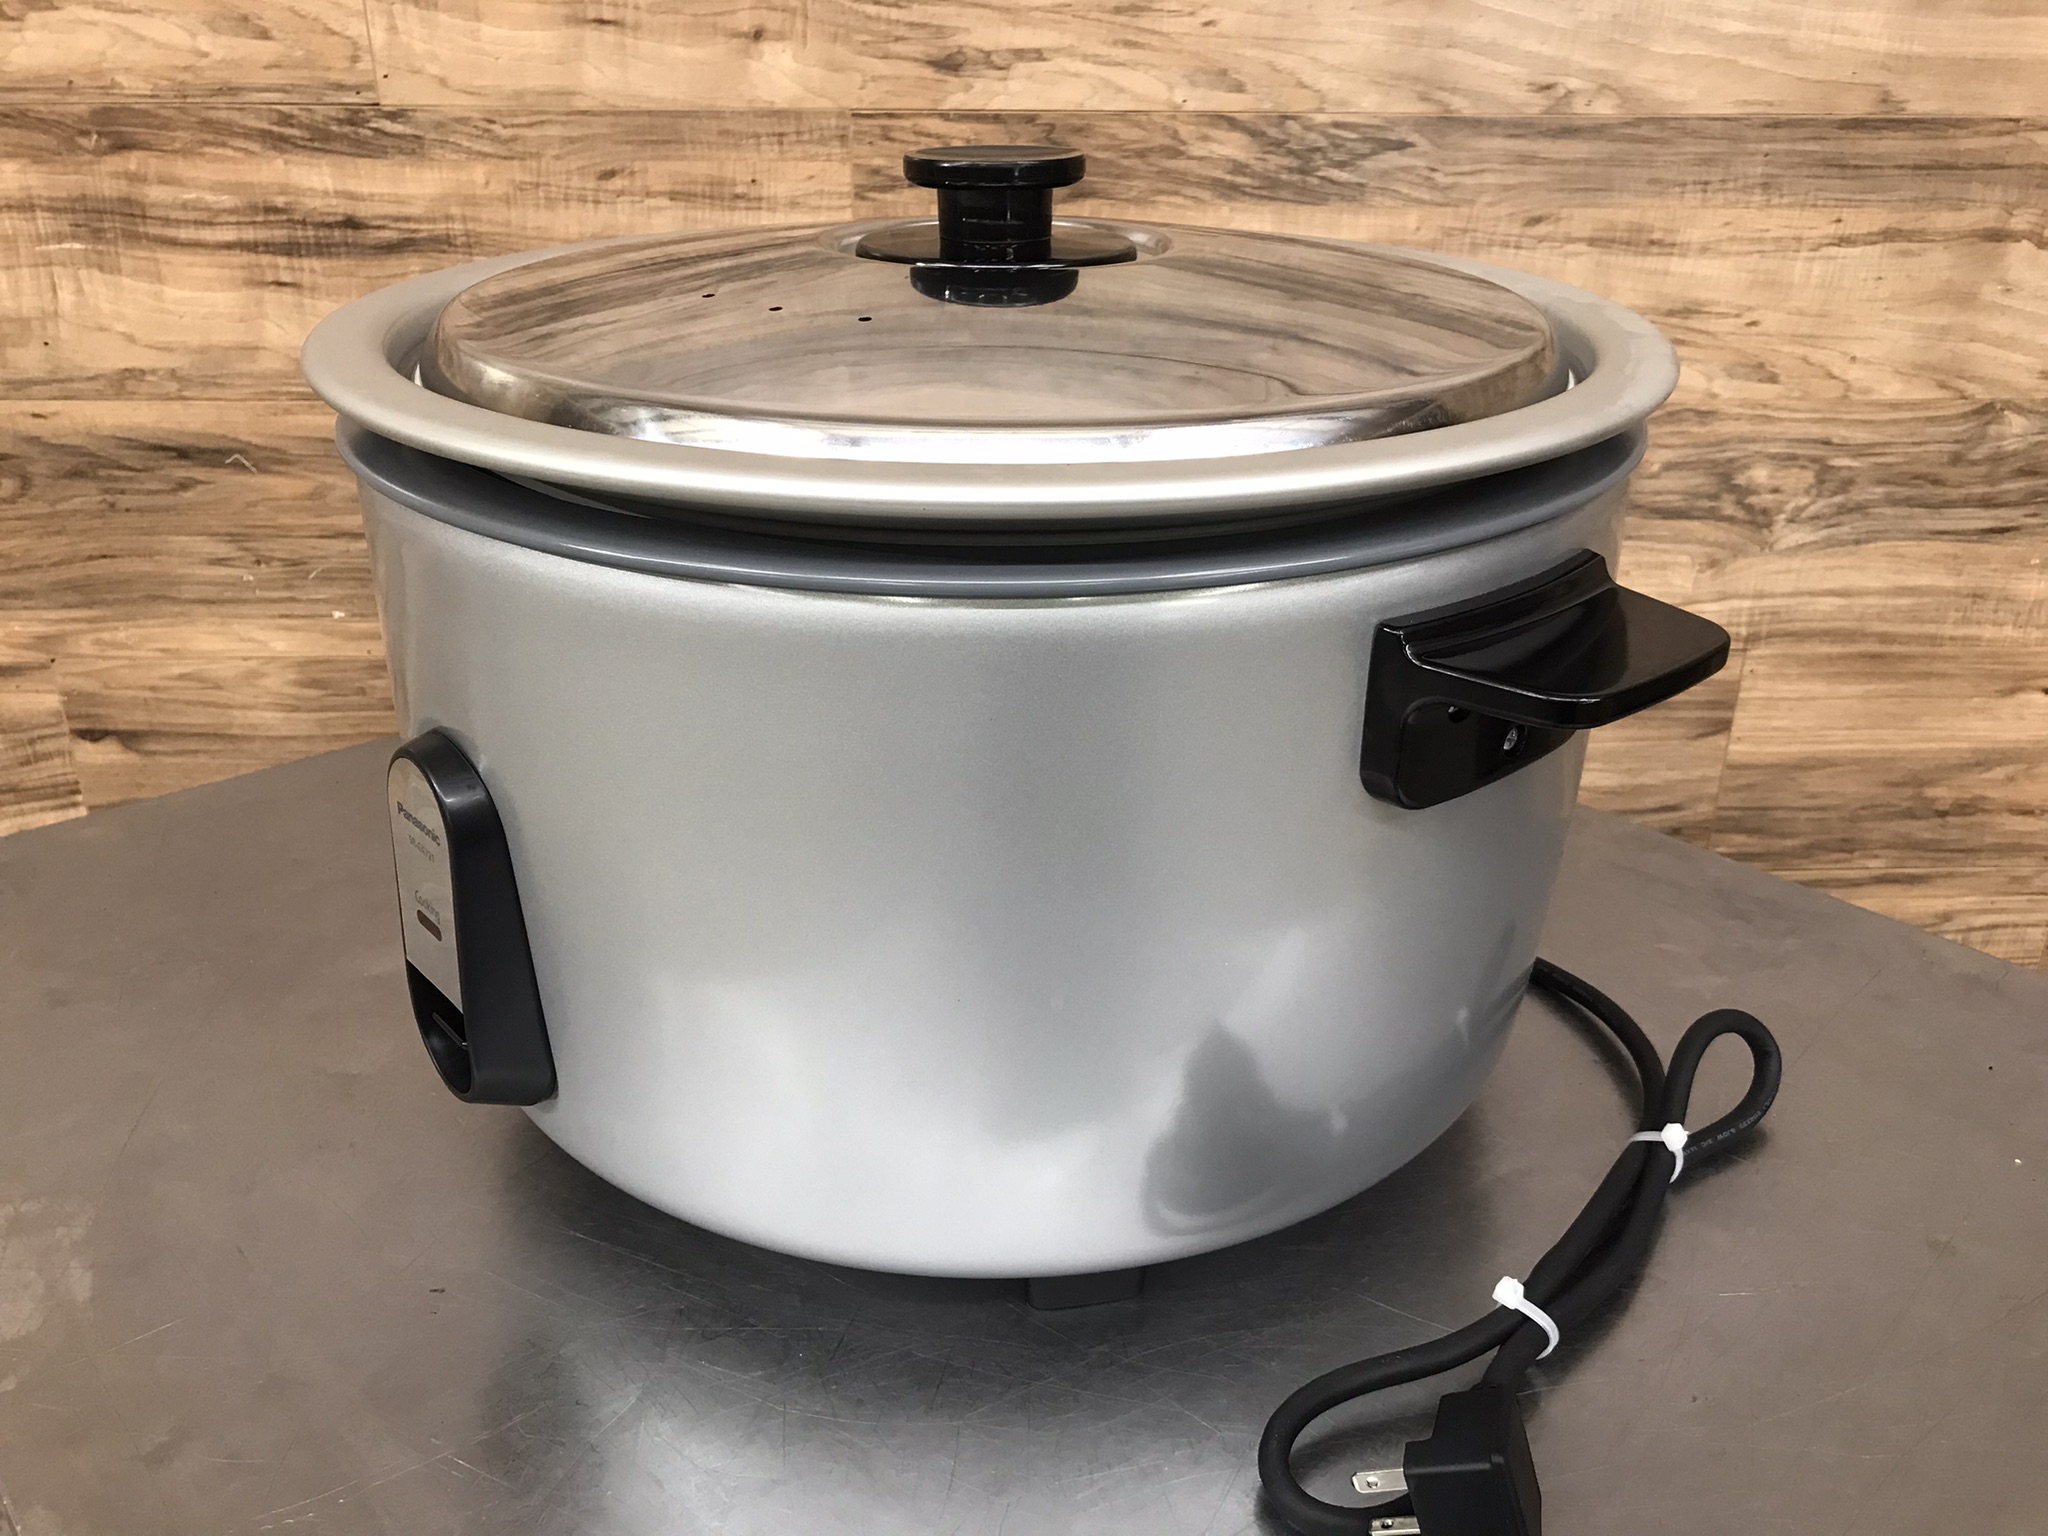 SANYO Rice Cookers for sale